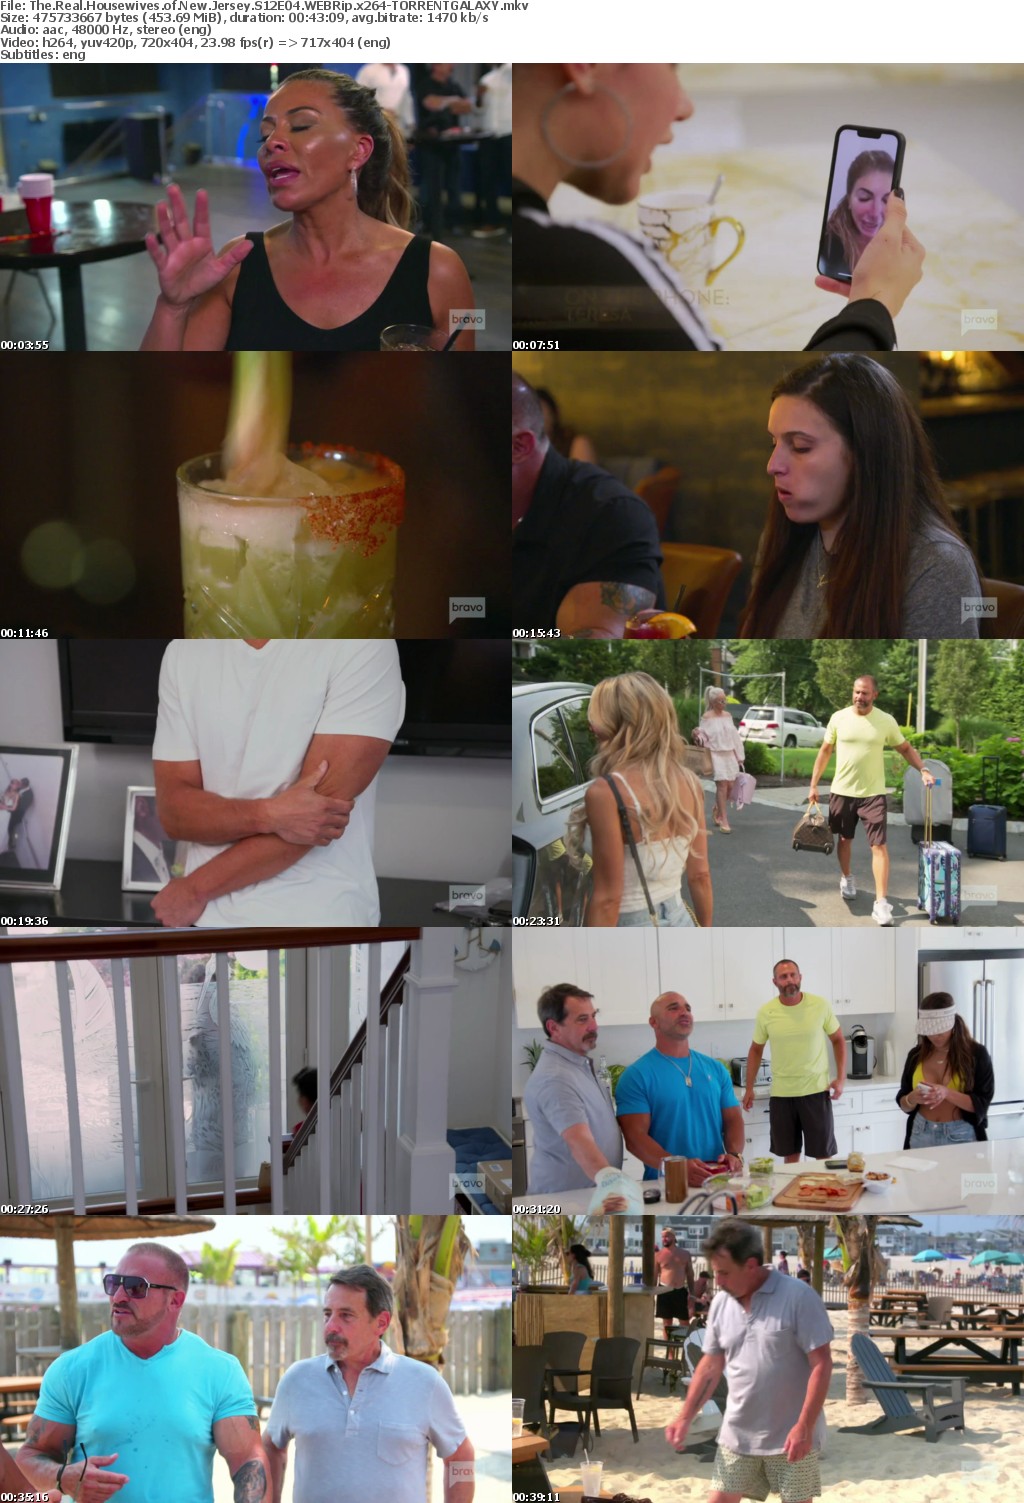 The Real Housewives of New Jersey S12E04 WEBRip x264-GALAXY